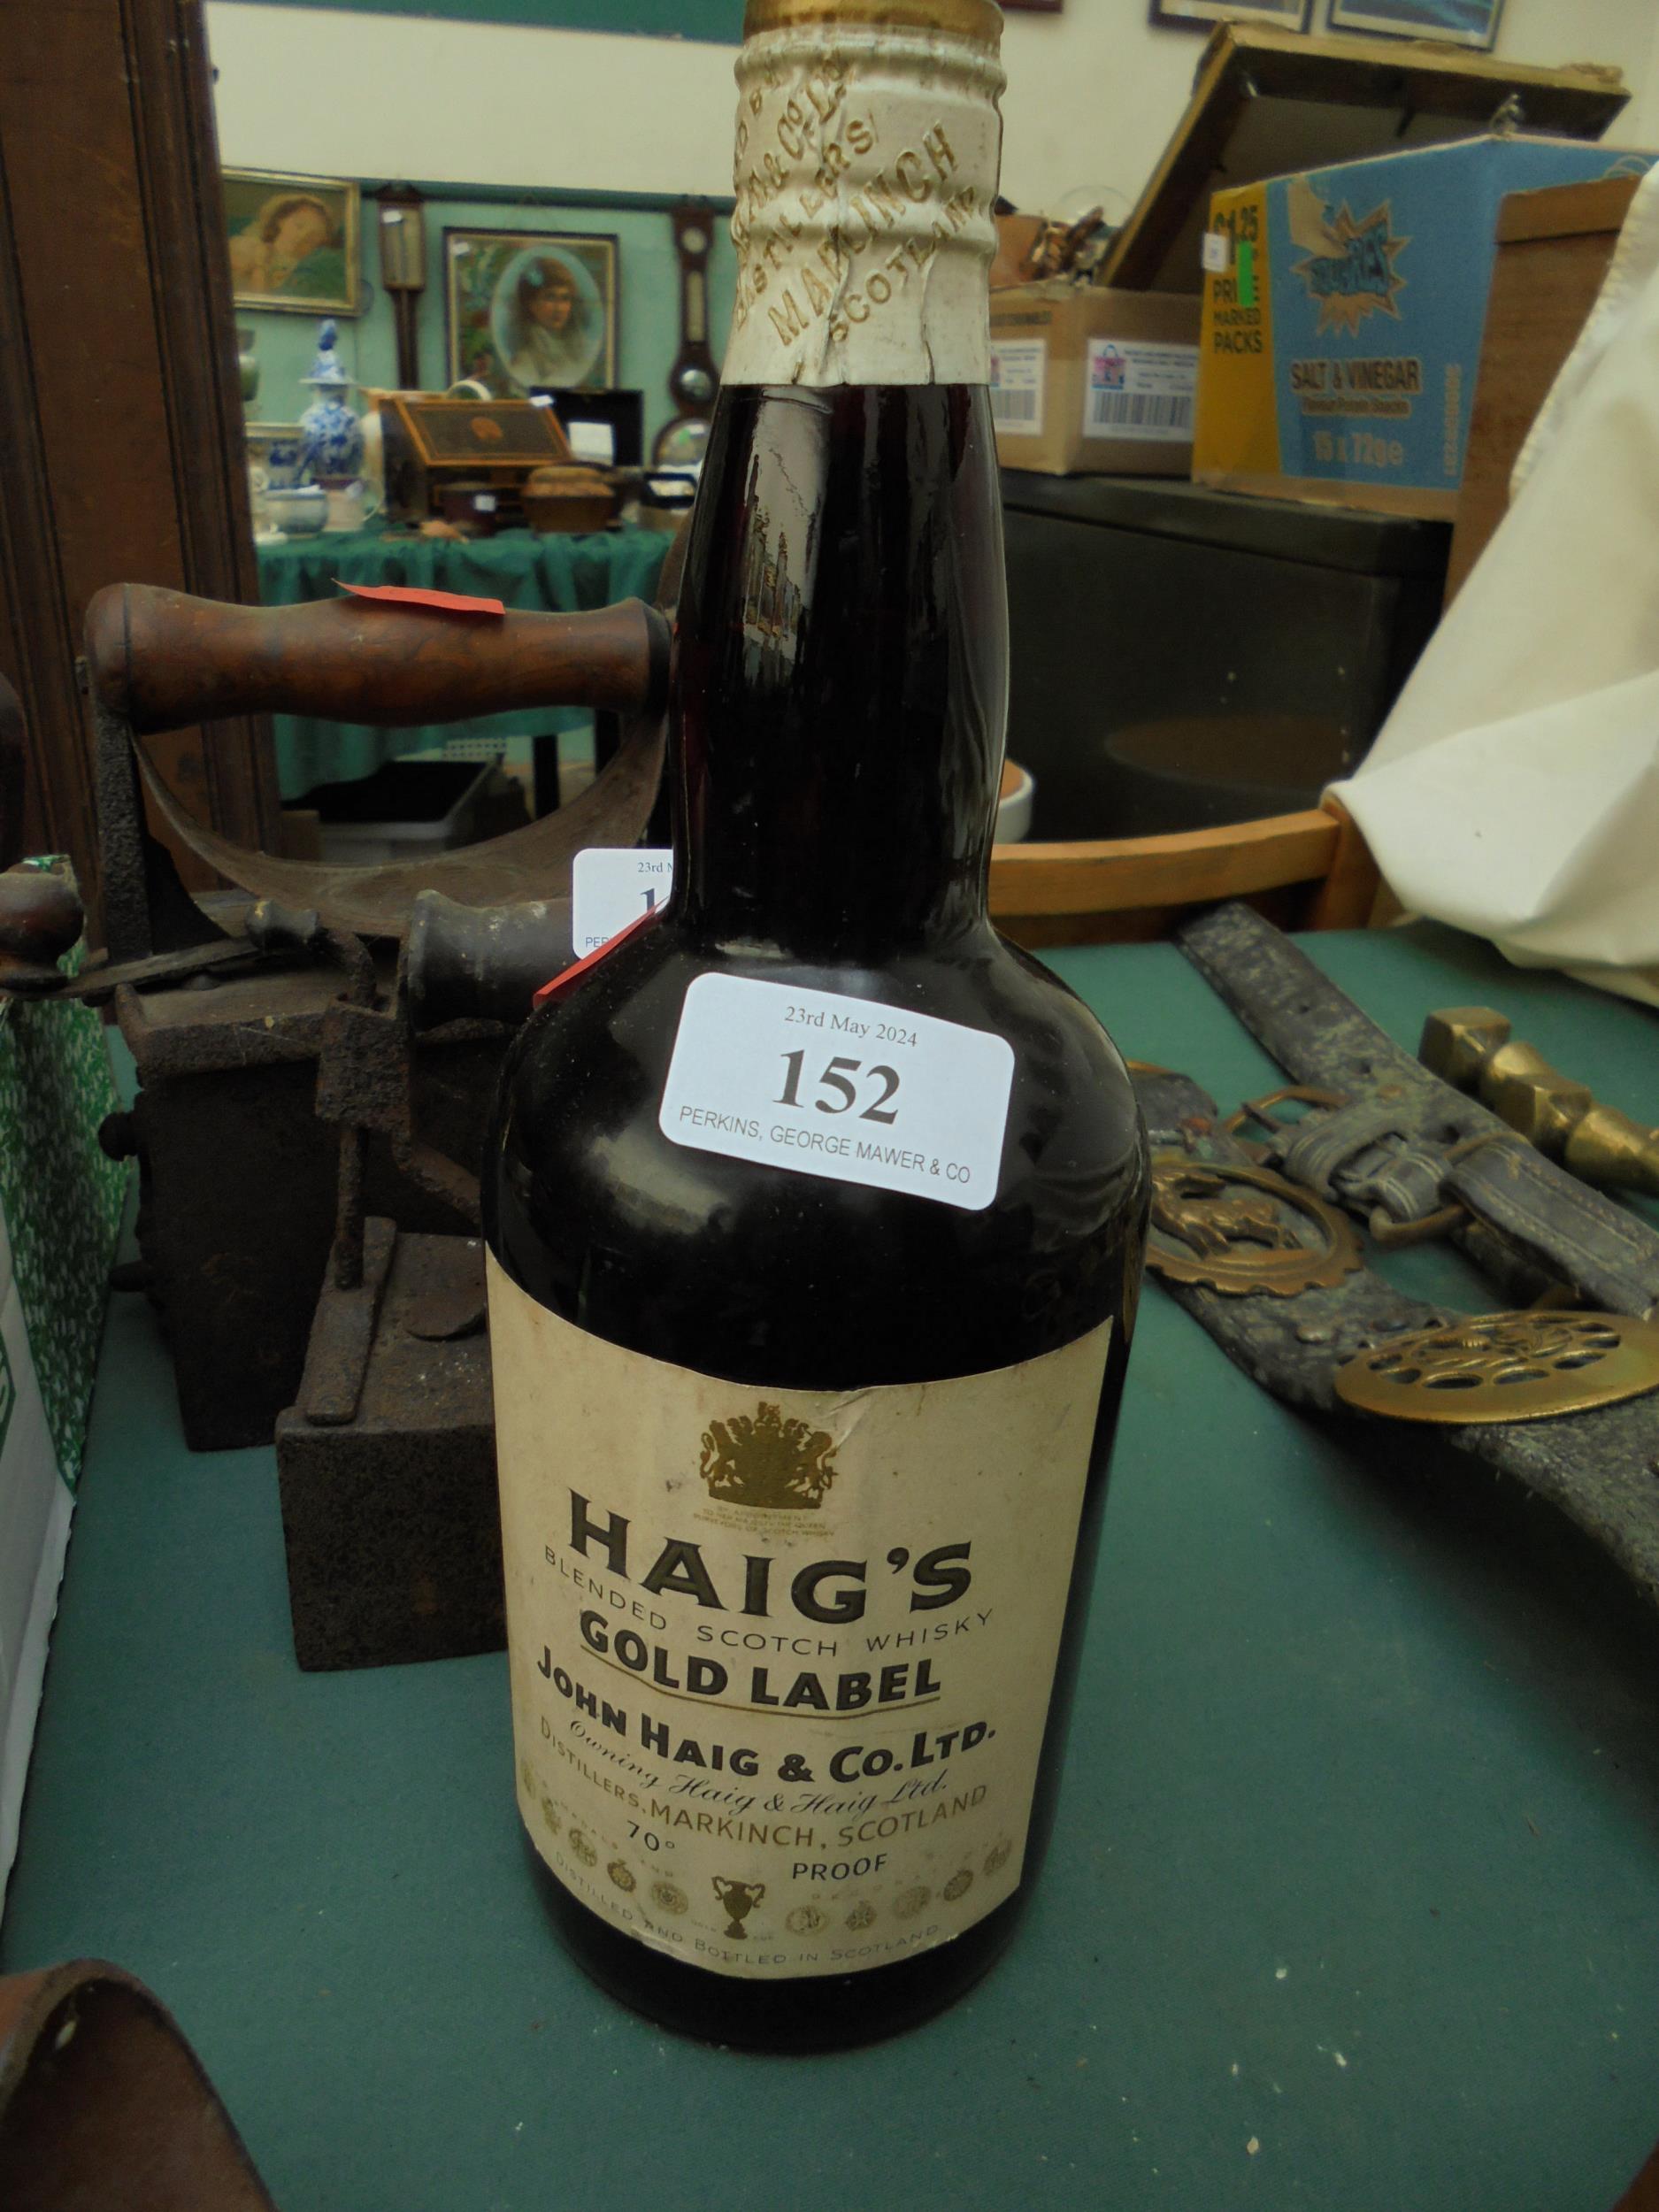 A very old and sealed bottle of Haigh's Gold Label Scotch Whisky